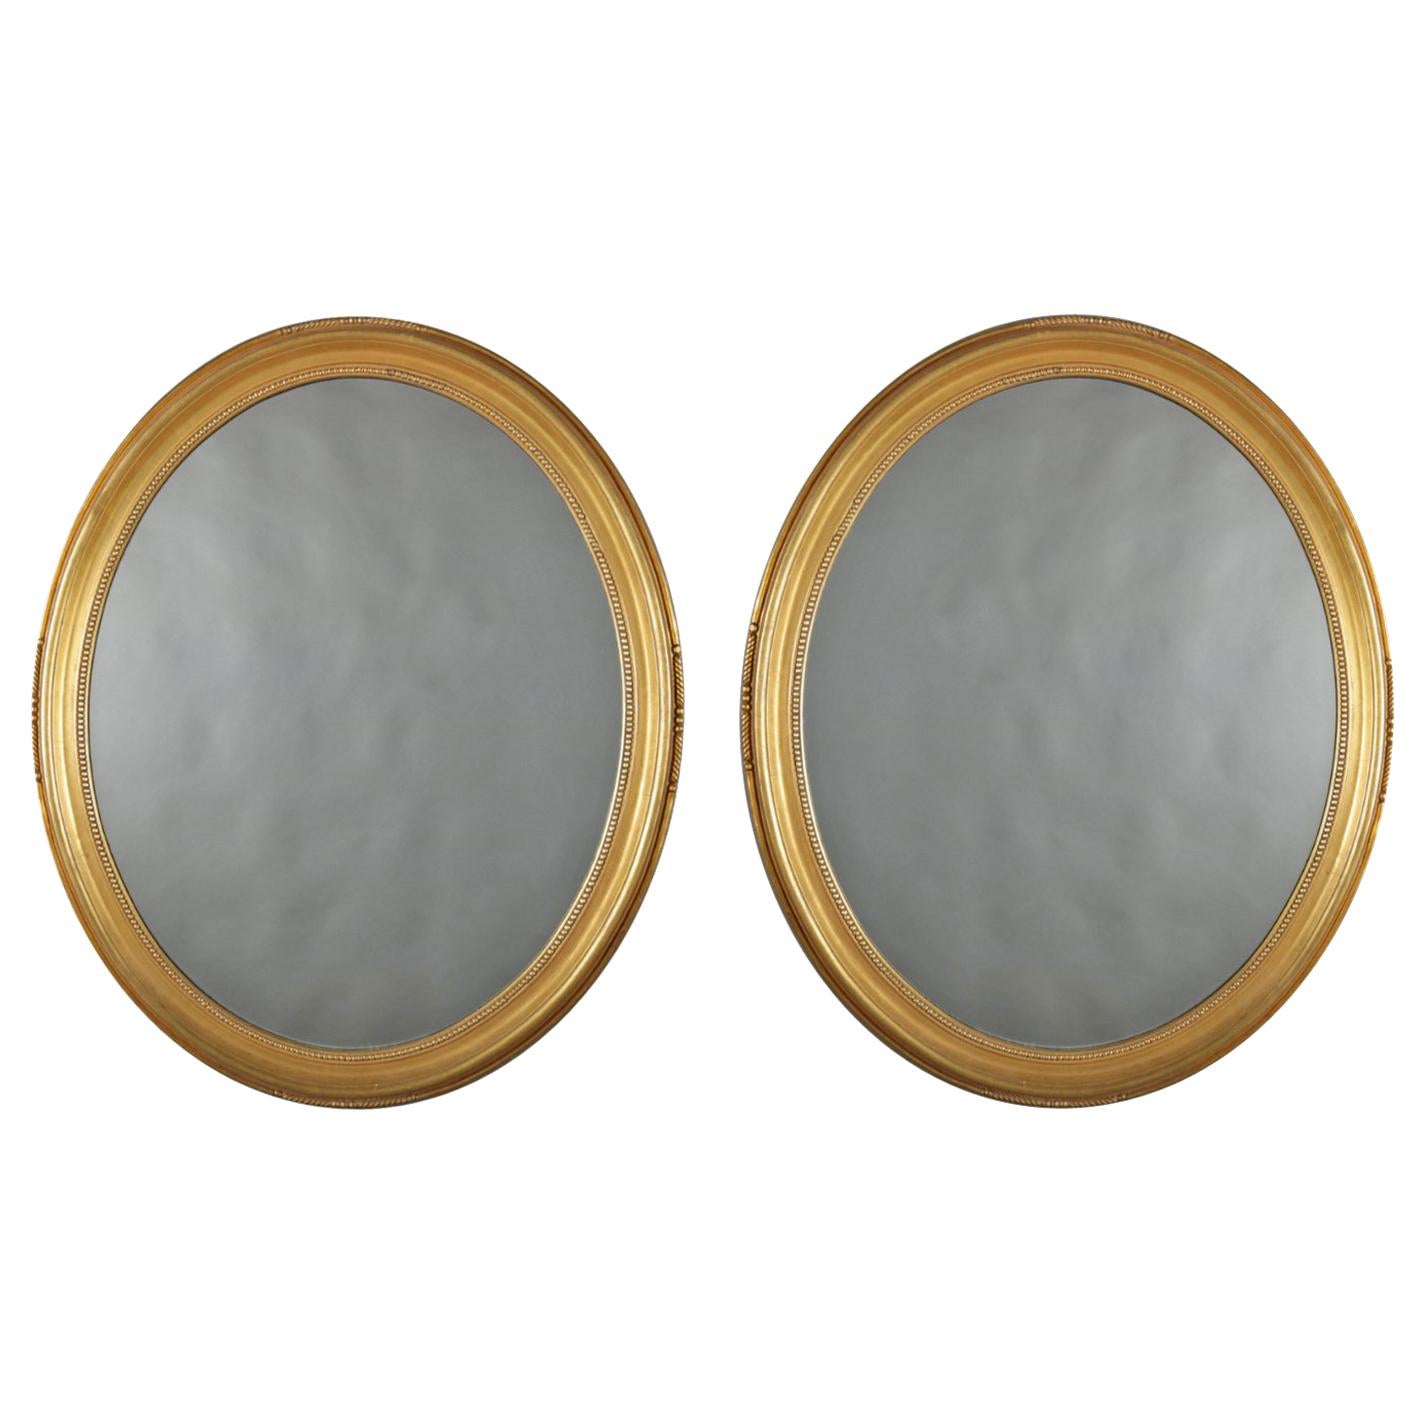 Vintage Pair of Oval Beaded Giltwood Wall Mirrors, 20th Century